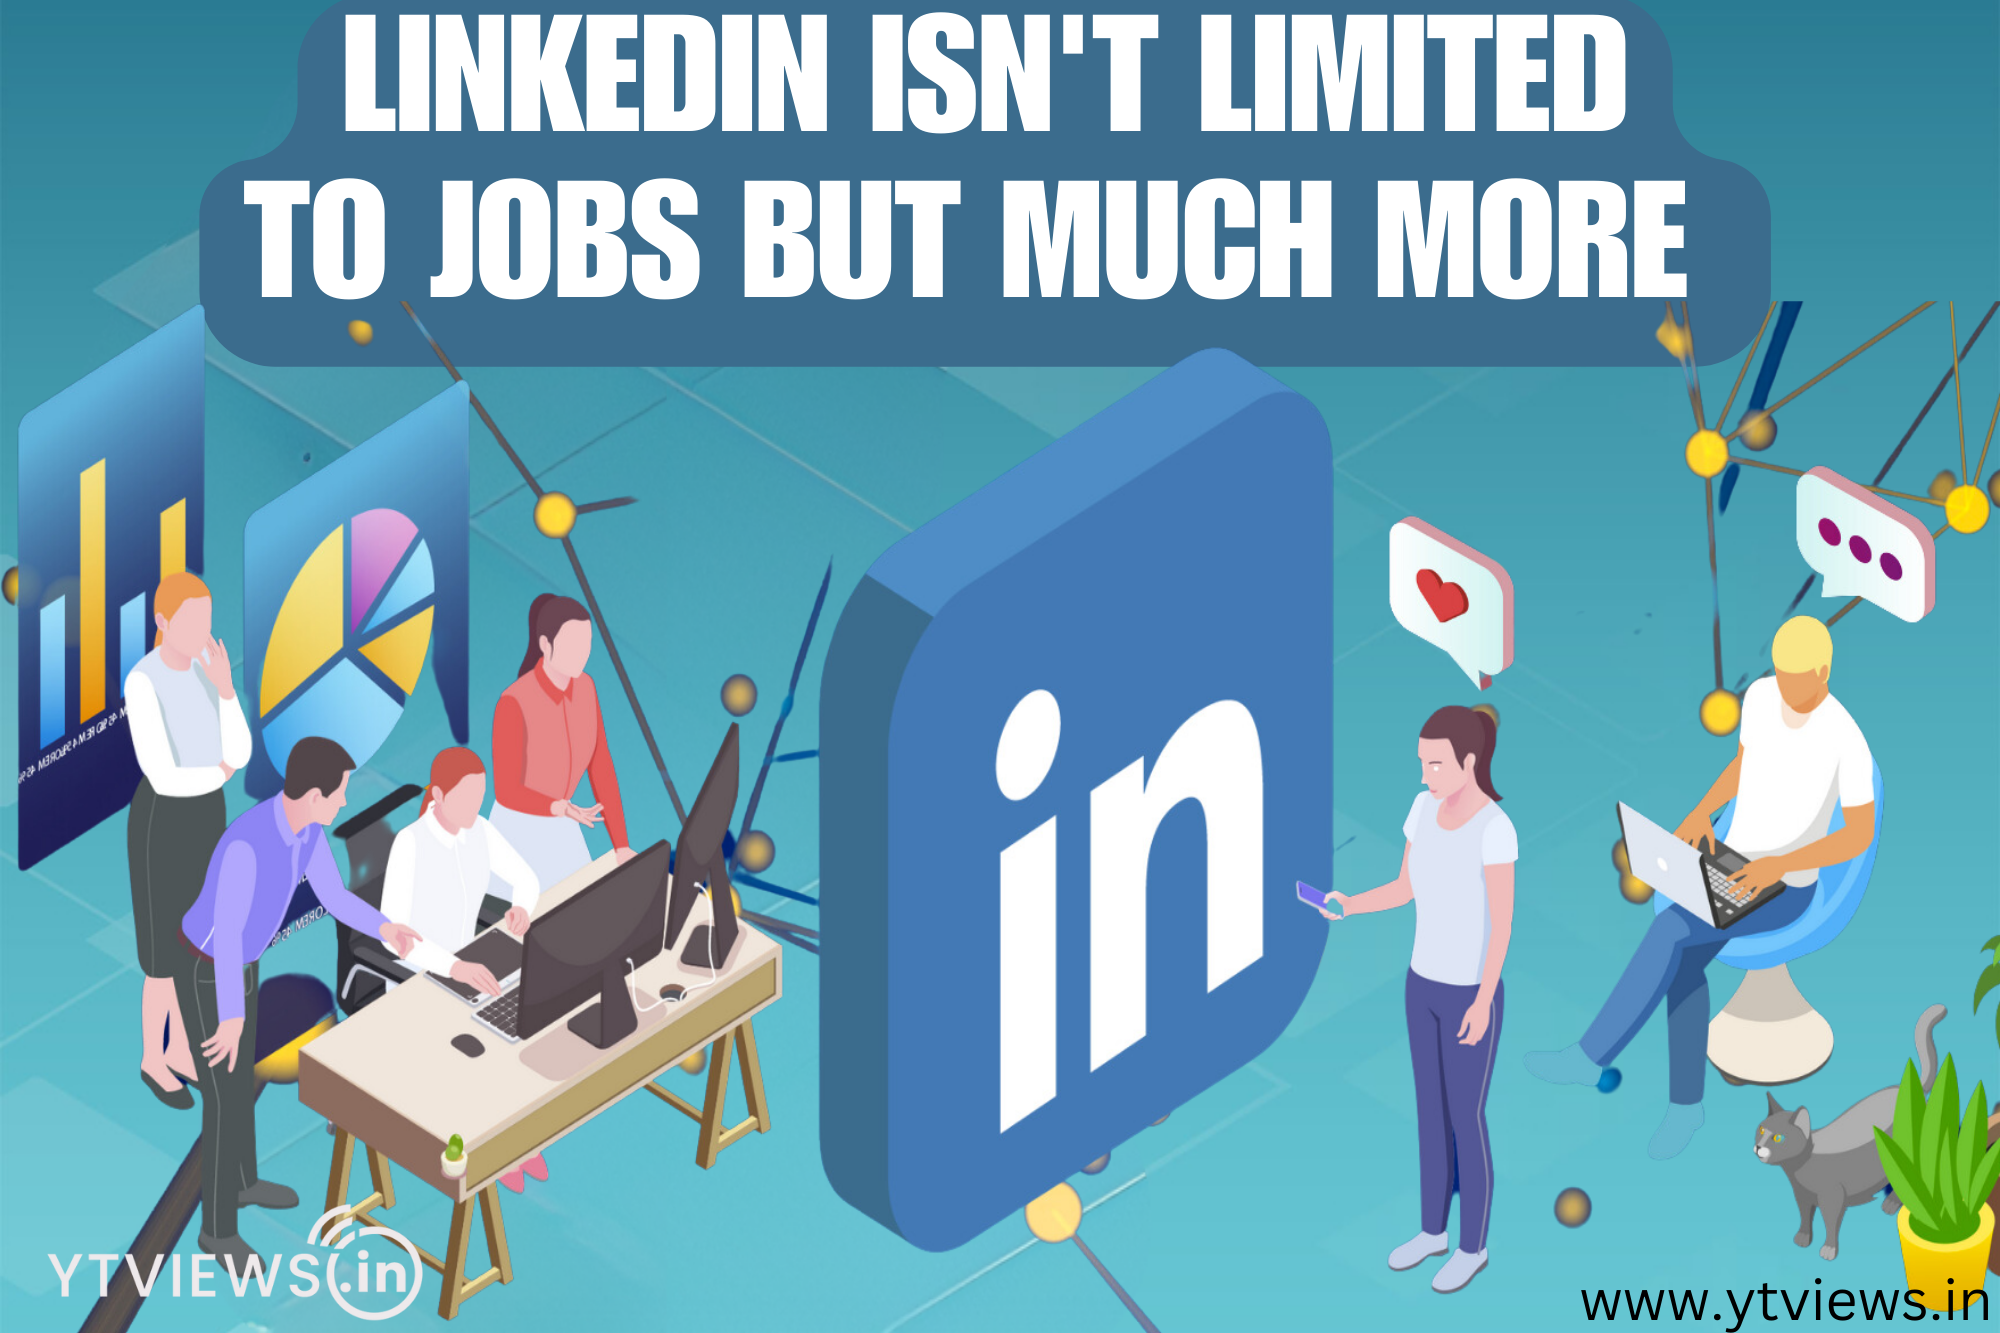 LinkedIn isn’t limited to jobs but much more